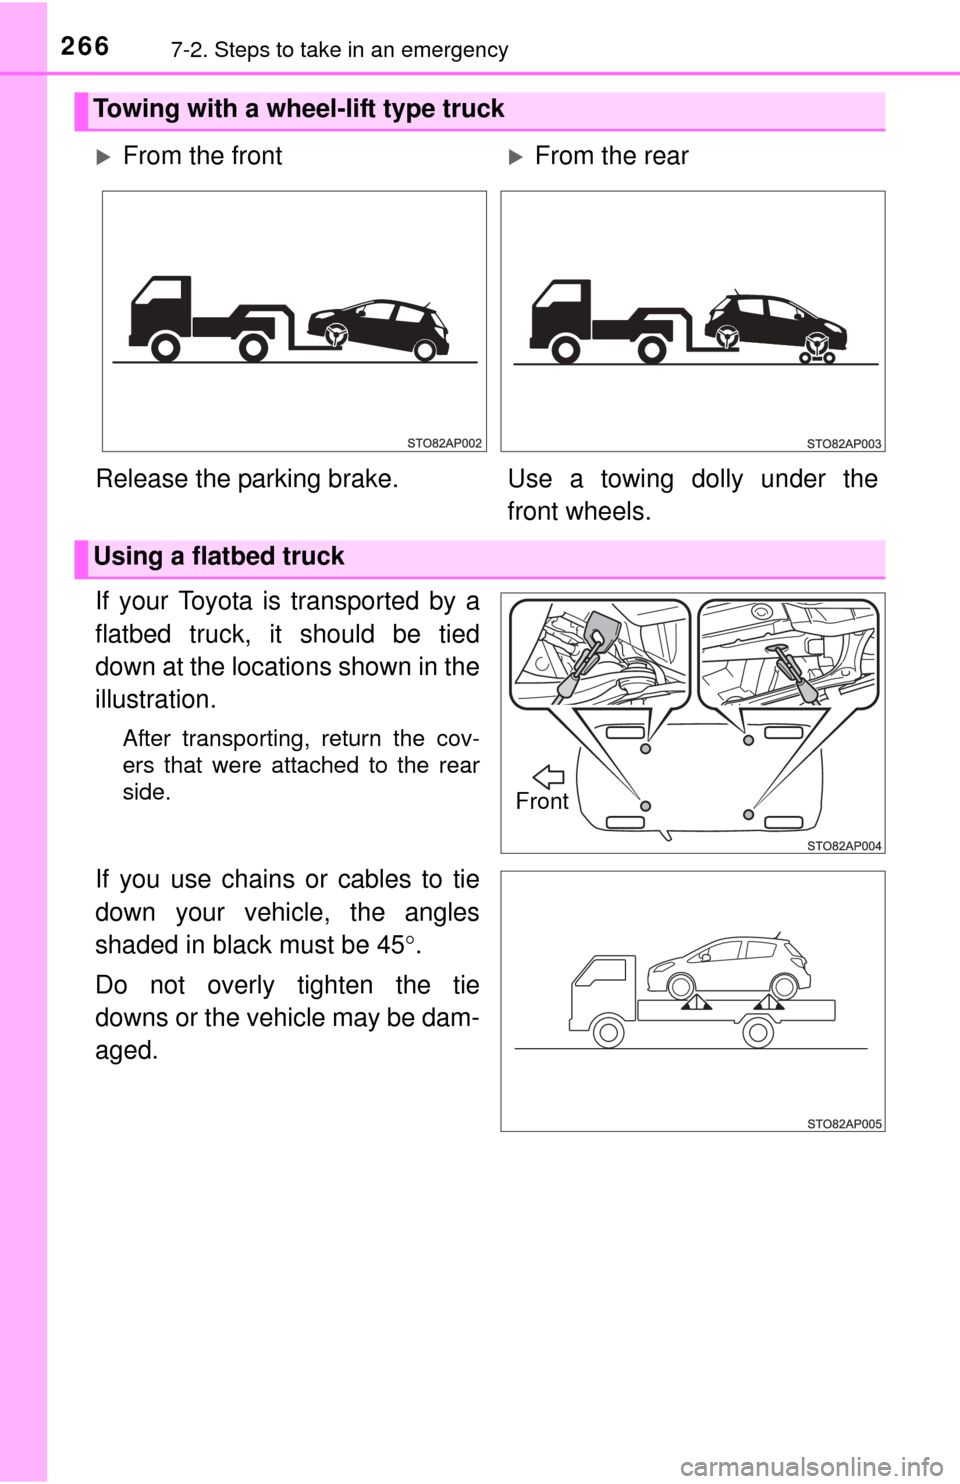 TOYOTA YARIS 2015 3.G User Guide 2667-2. Steps to take in an emergency
If your Toyota is transported by a
flatbed truck, it should be tied
down at the locations shown in the
illustration.
After transporting, return the cov-
ers that 